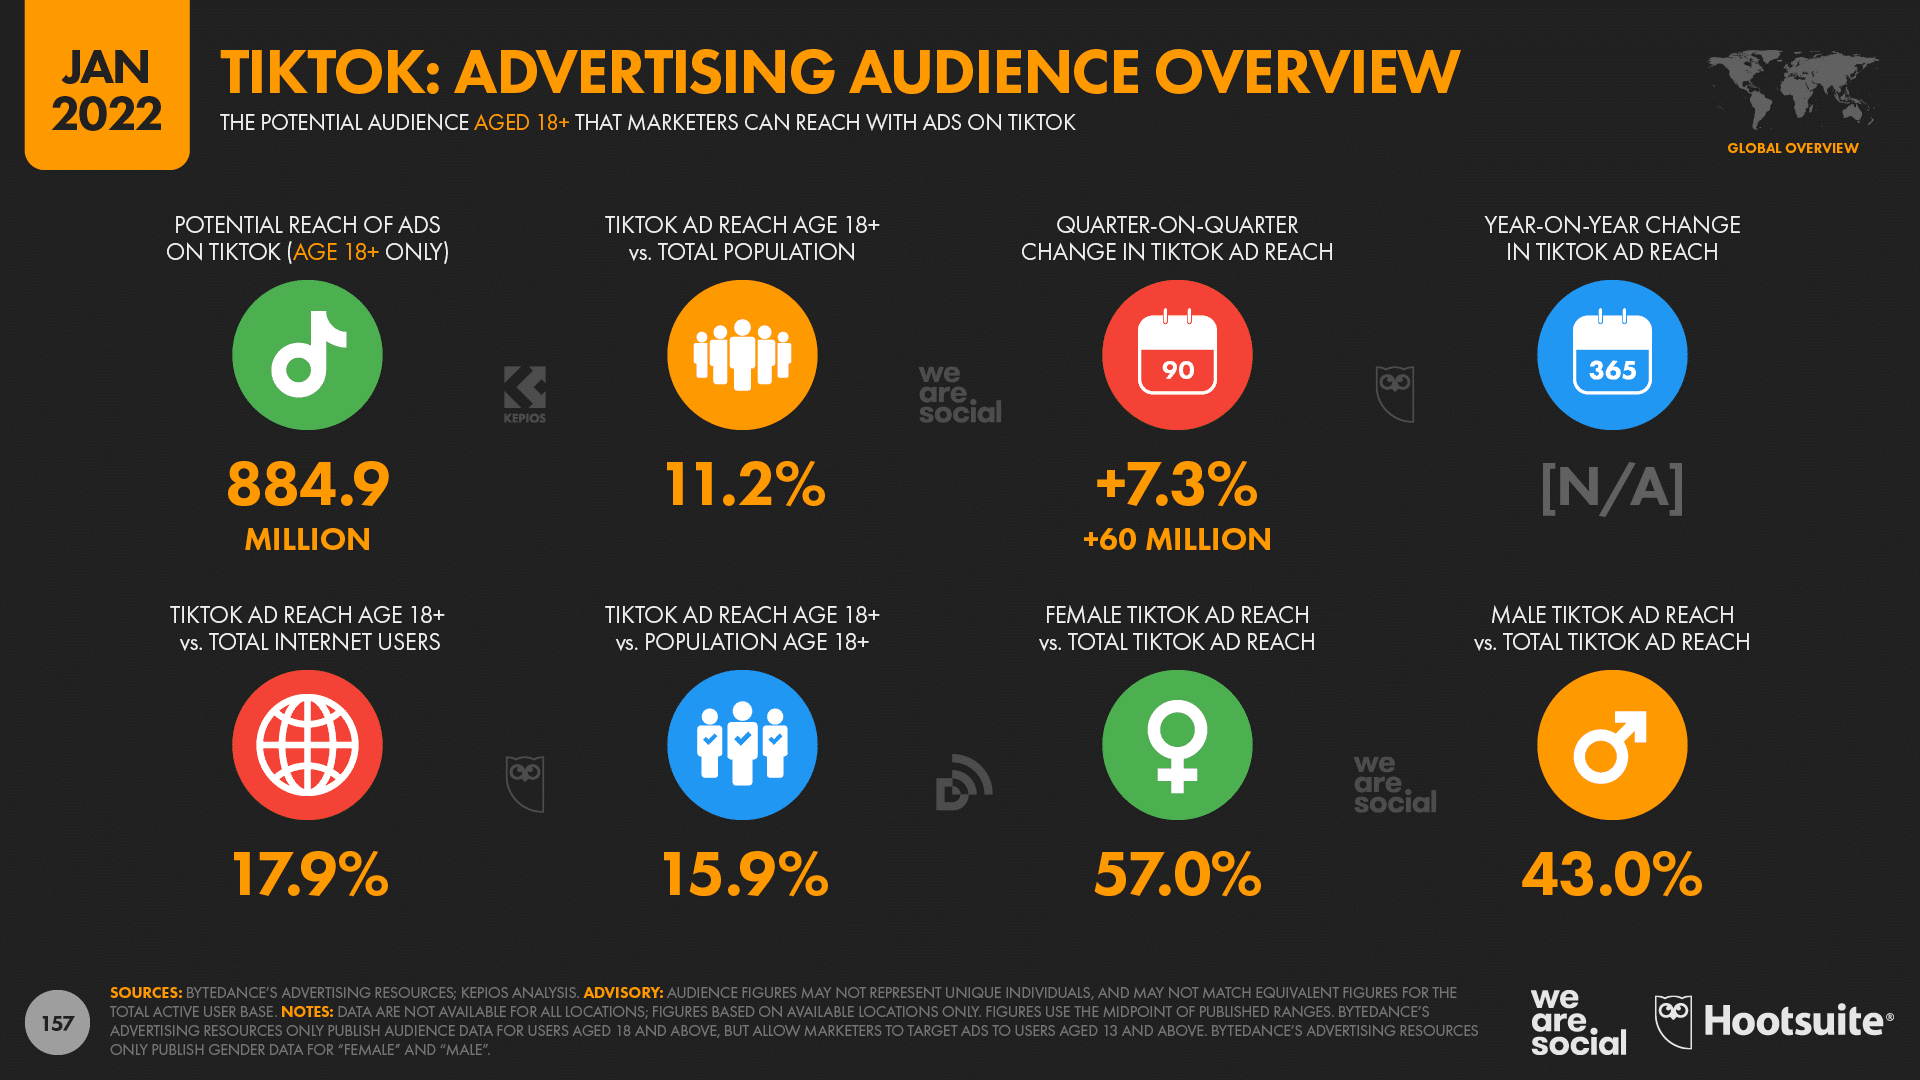 chart showing TikTok advertising audience overview